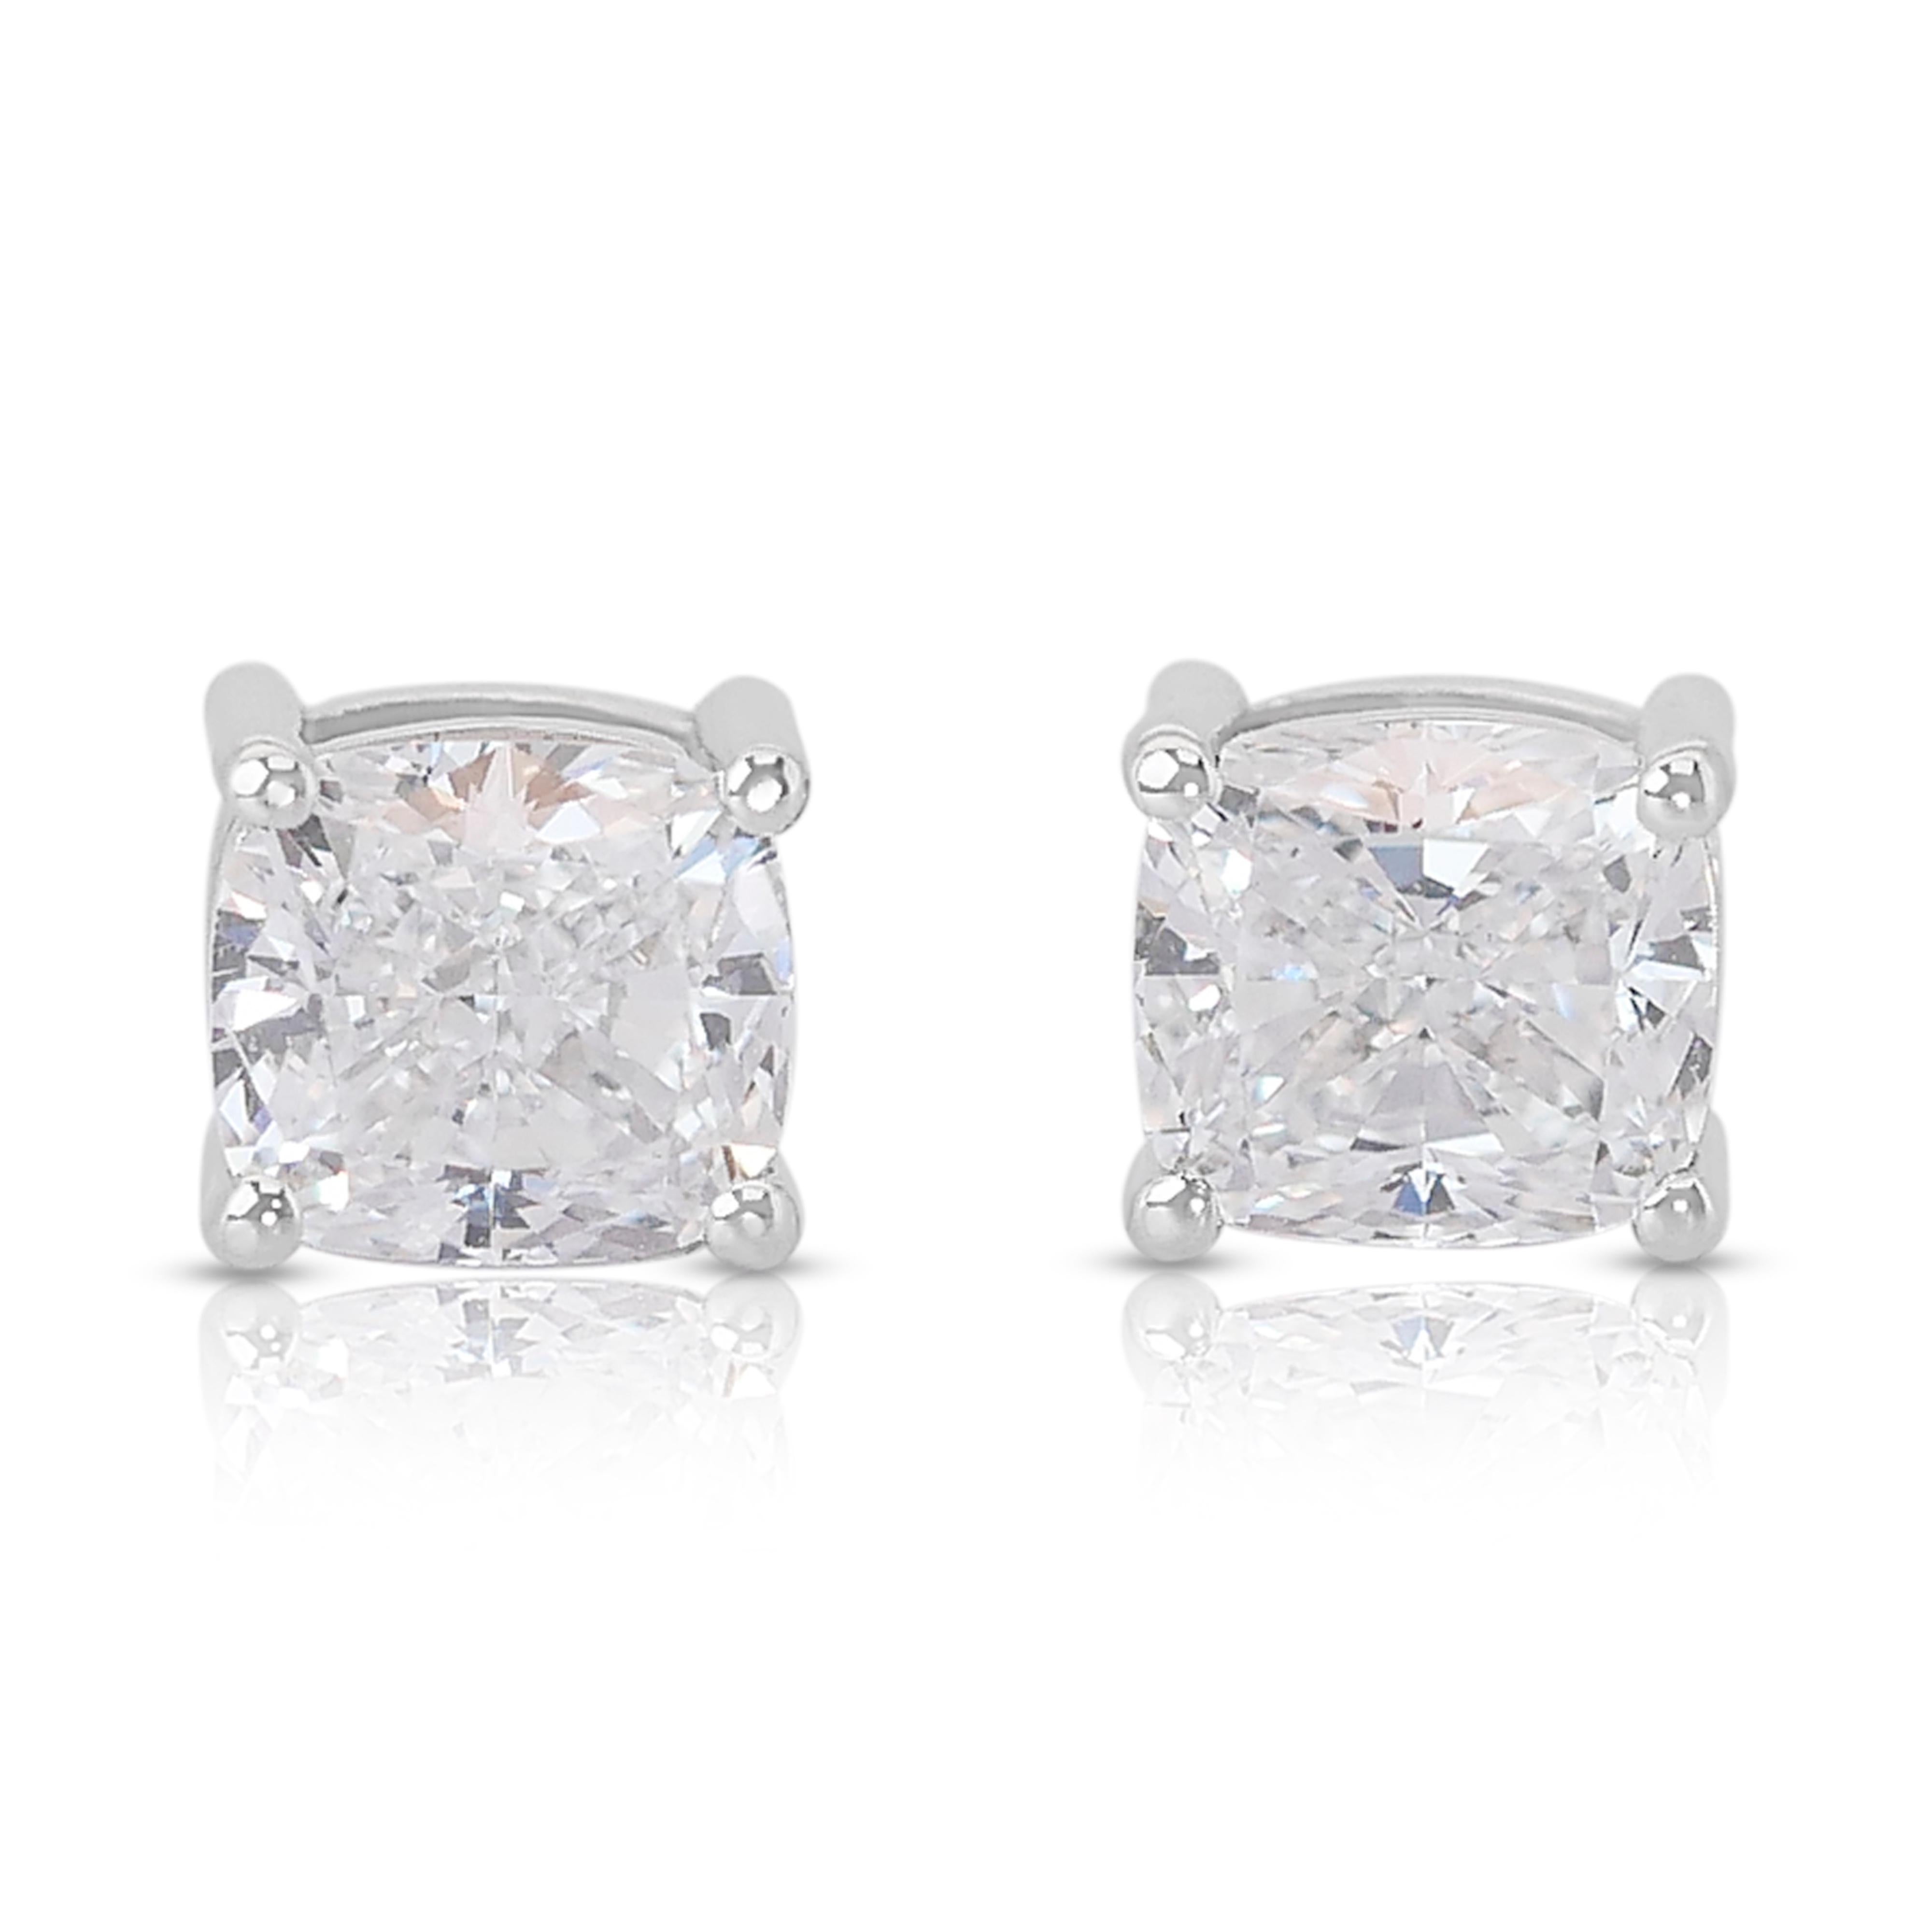 Lustrous 1.60ct Diamonds Stud Earrings in 18k White Gold - GIA Certified For Sale 2